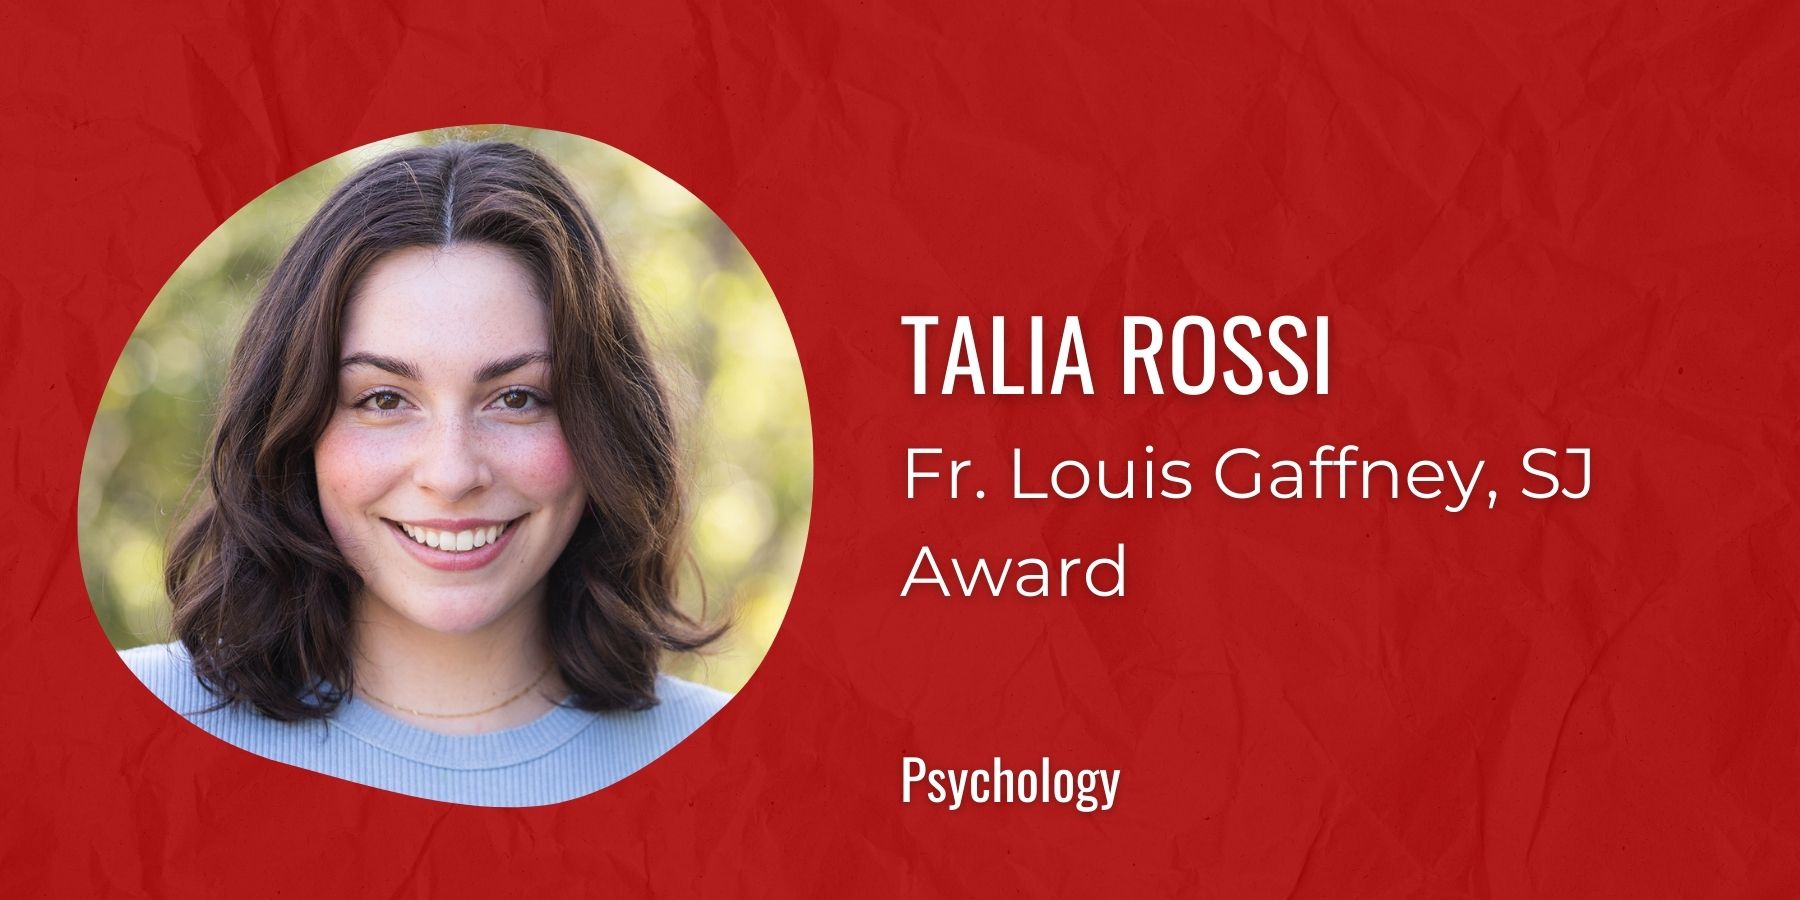 Image of Talia Rossi with text: Fr. Louis Gaffney, SJ Award, Psychology
